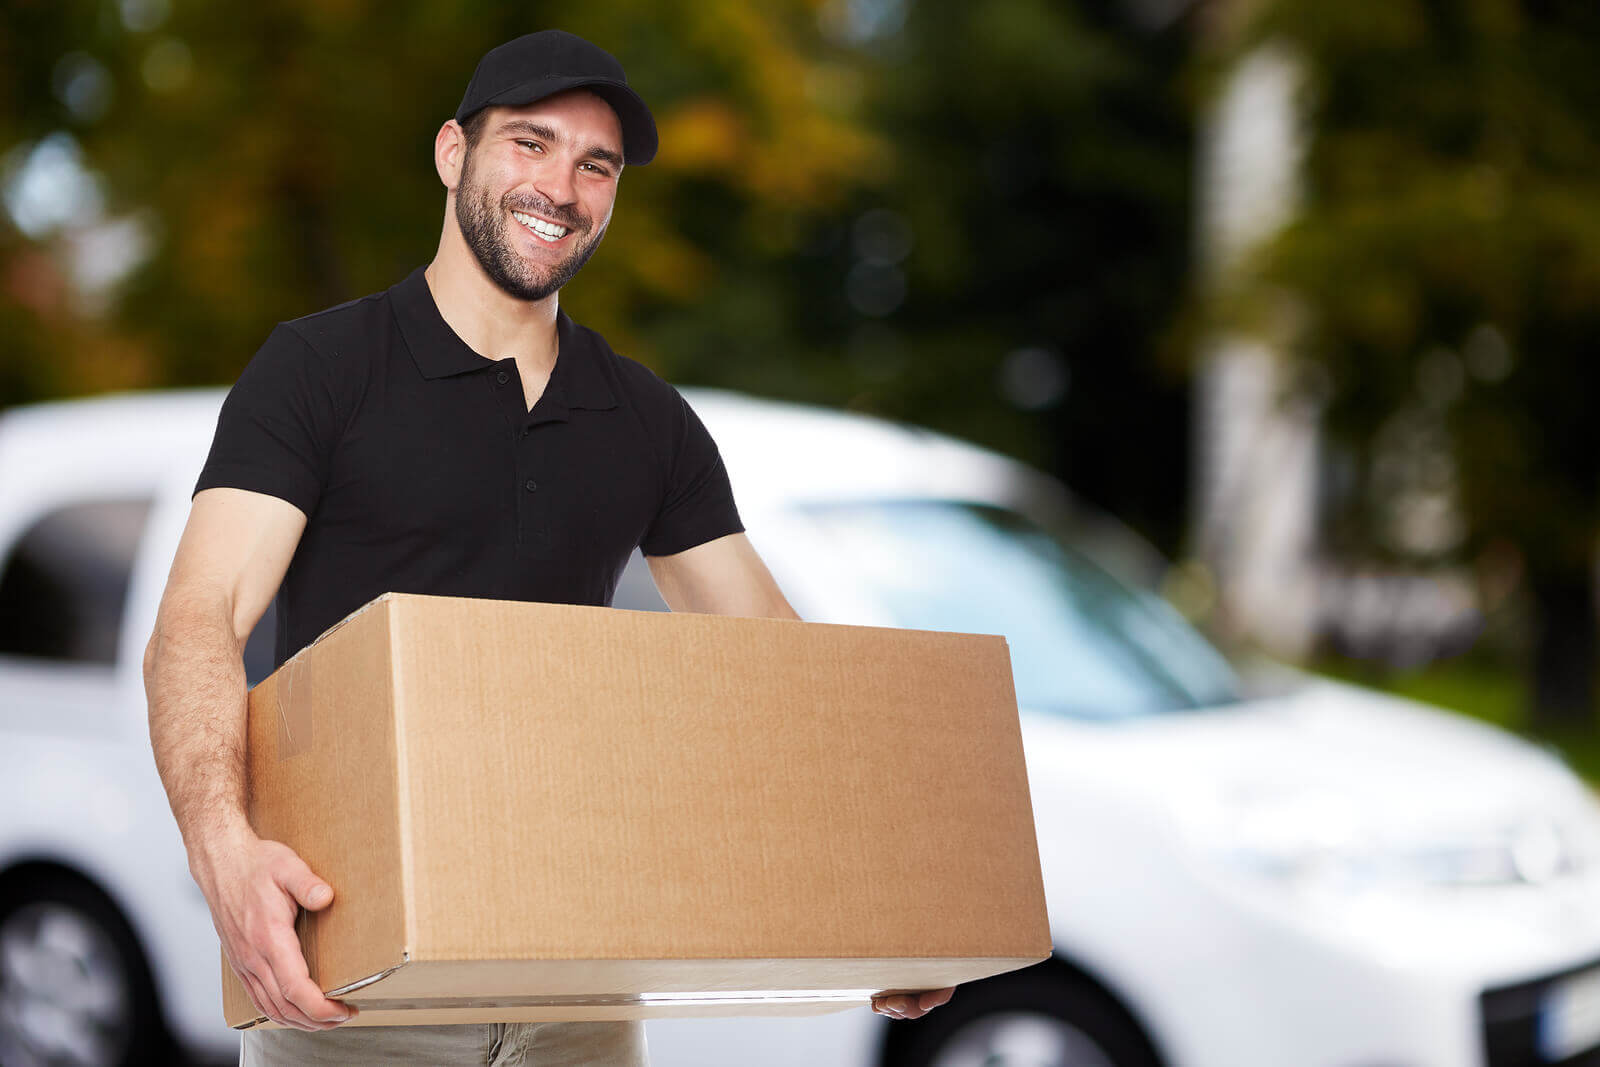 bigstock Smiling Delivery Man 72723652